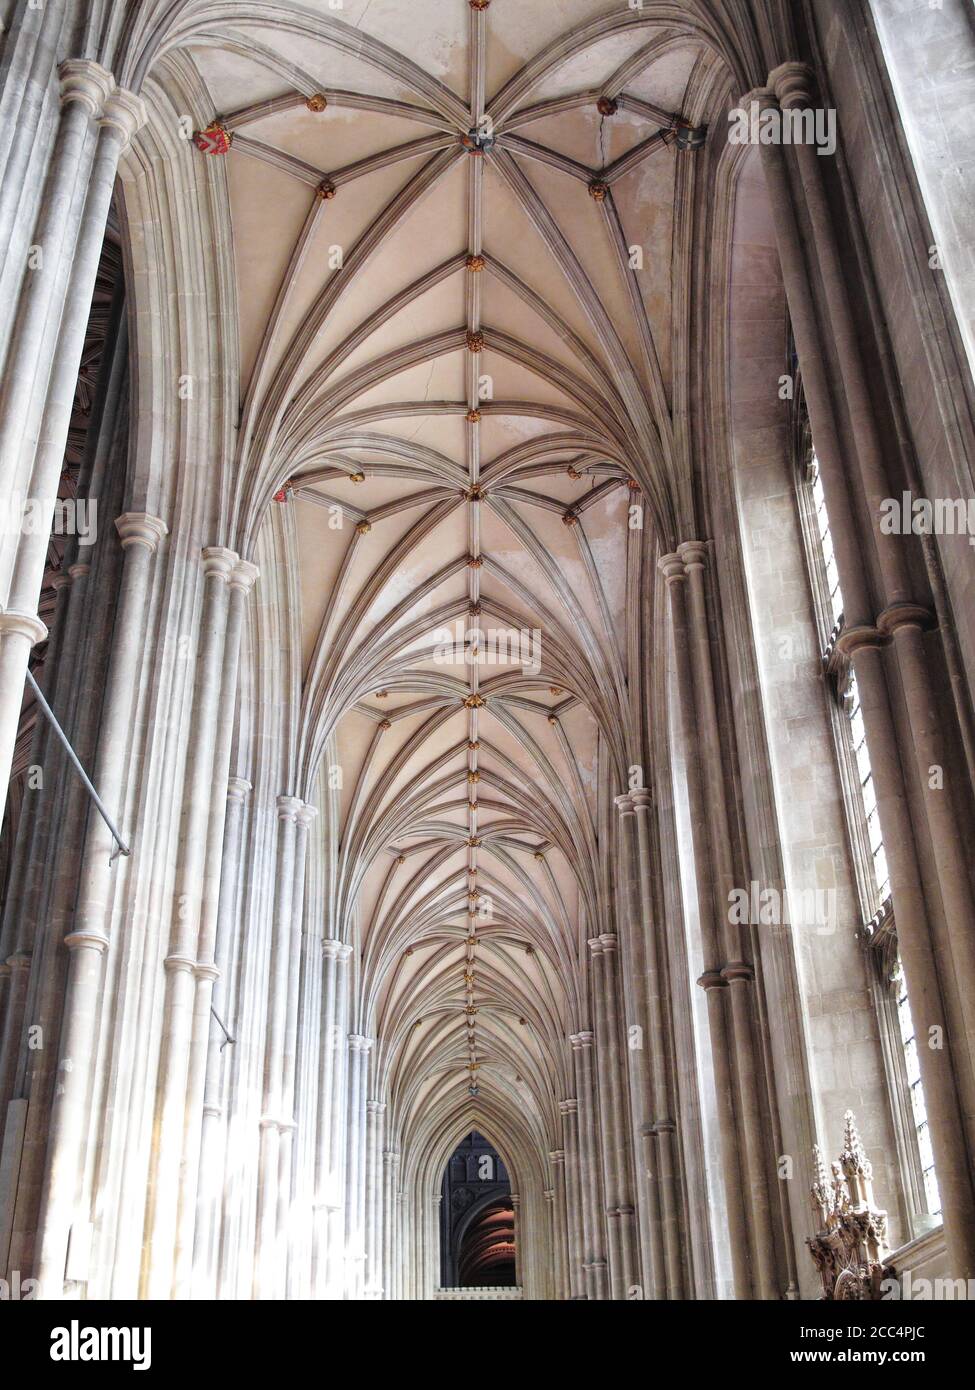 Vaulted ceiling of Canterbury Cathedral Kent England UK founded by St Augustine in AD602 and is a popular tourism travel destination visitor landmark Stock Photo